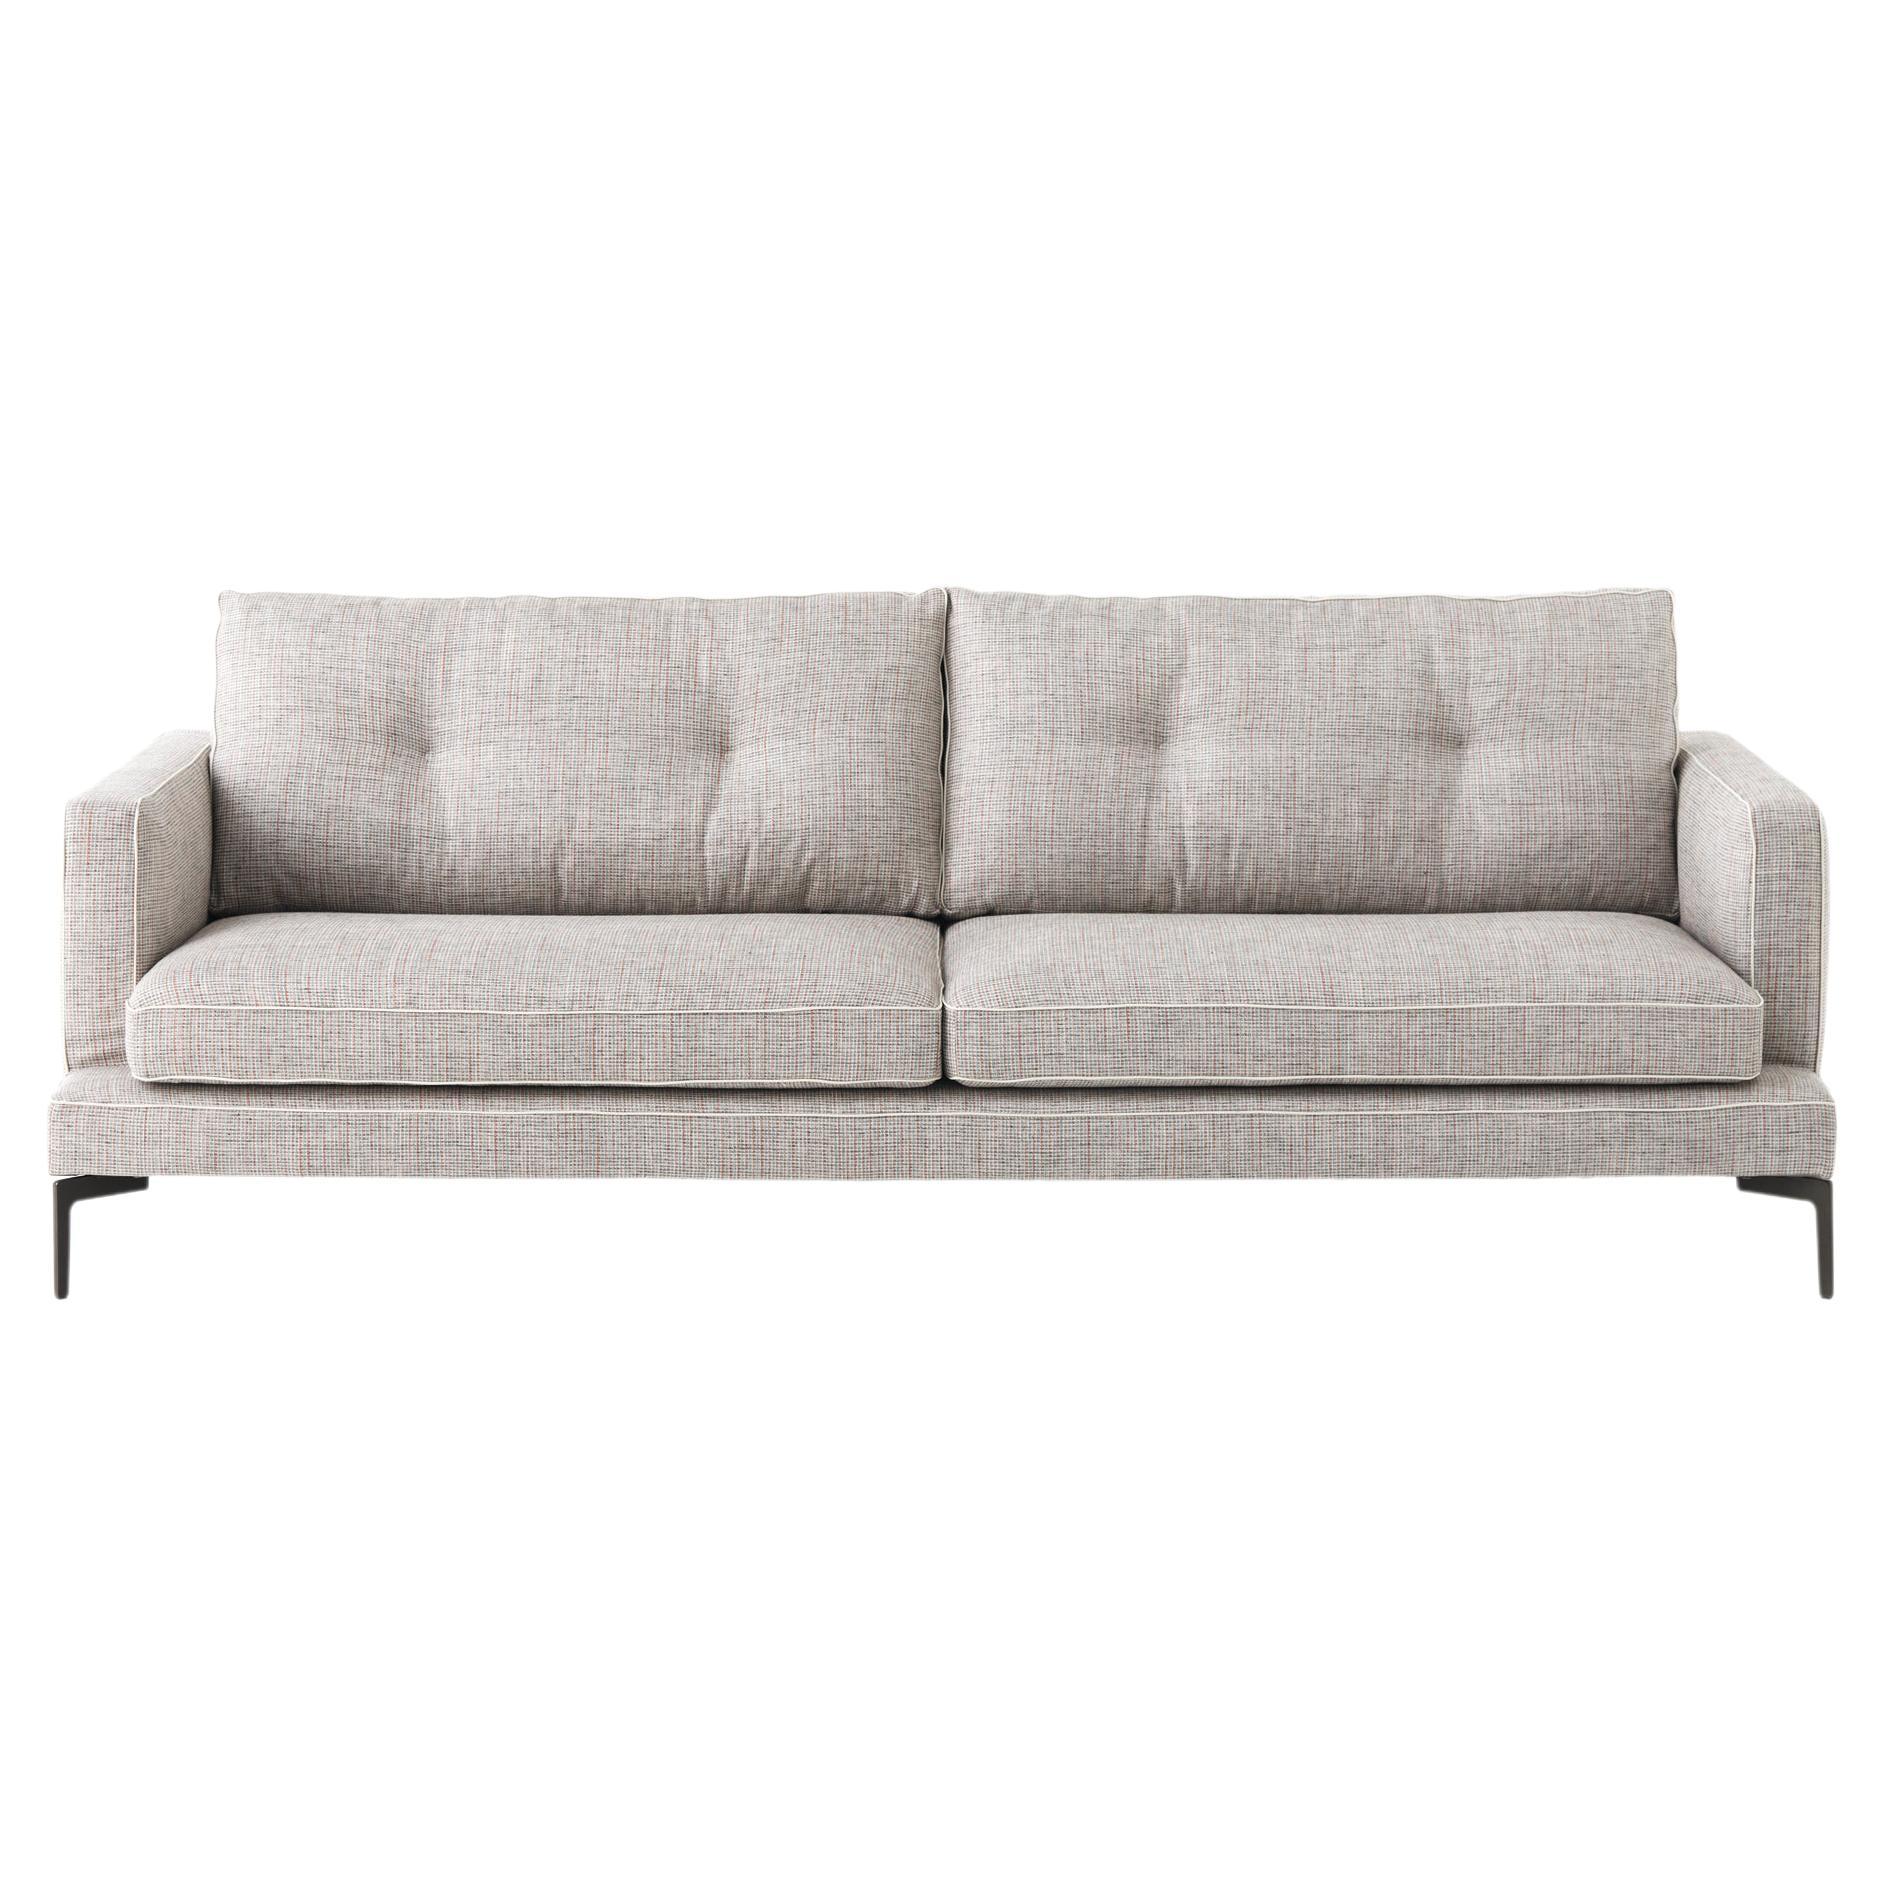 Essentiel 2-Seat 220 Sofa in Vip Beige Upholstery & Grey Legs by Sergio Bicego For Sale